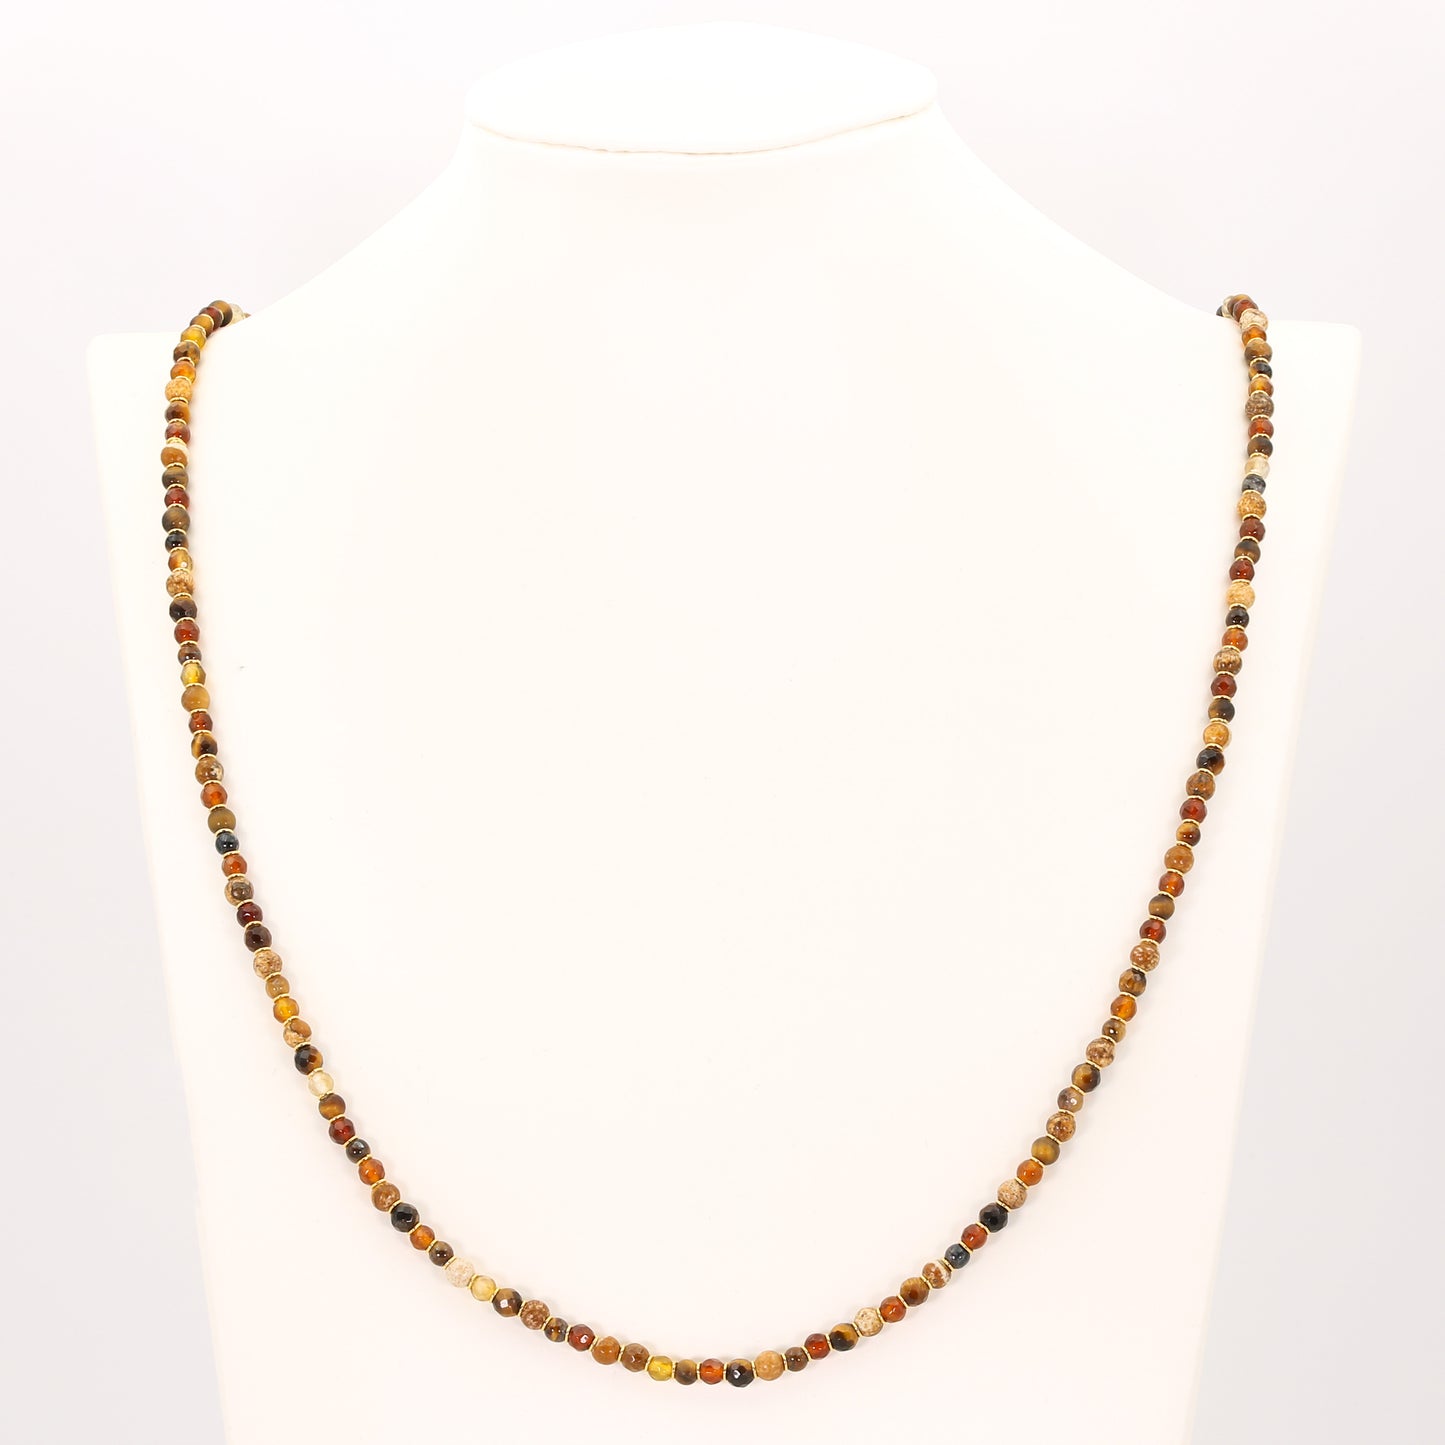 "Turcicus 80" Necklace - CAORLE THE SMALL VENICE Collection